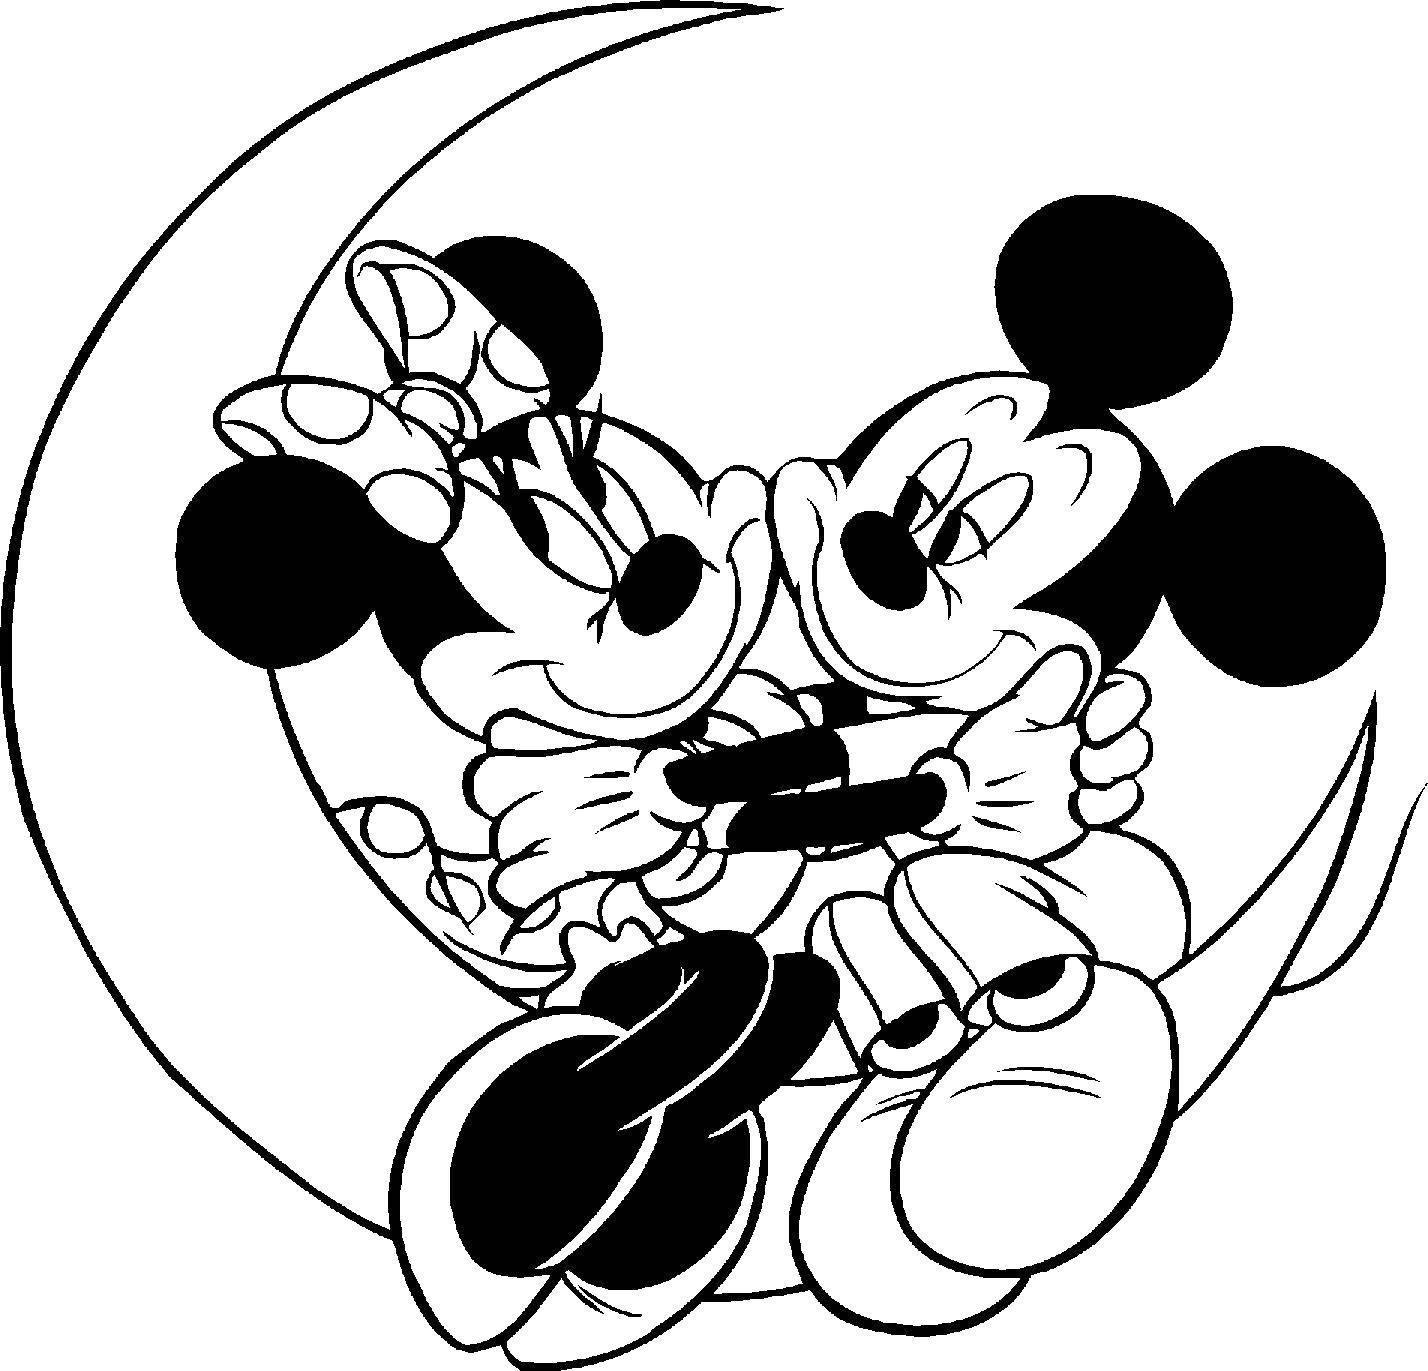 Coloring Mickey and Minnie mouse on the moon sway. Category Mickey mouse. Tags:  Mickymouse, Minnie mouse.